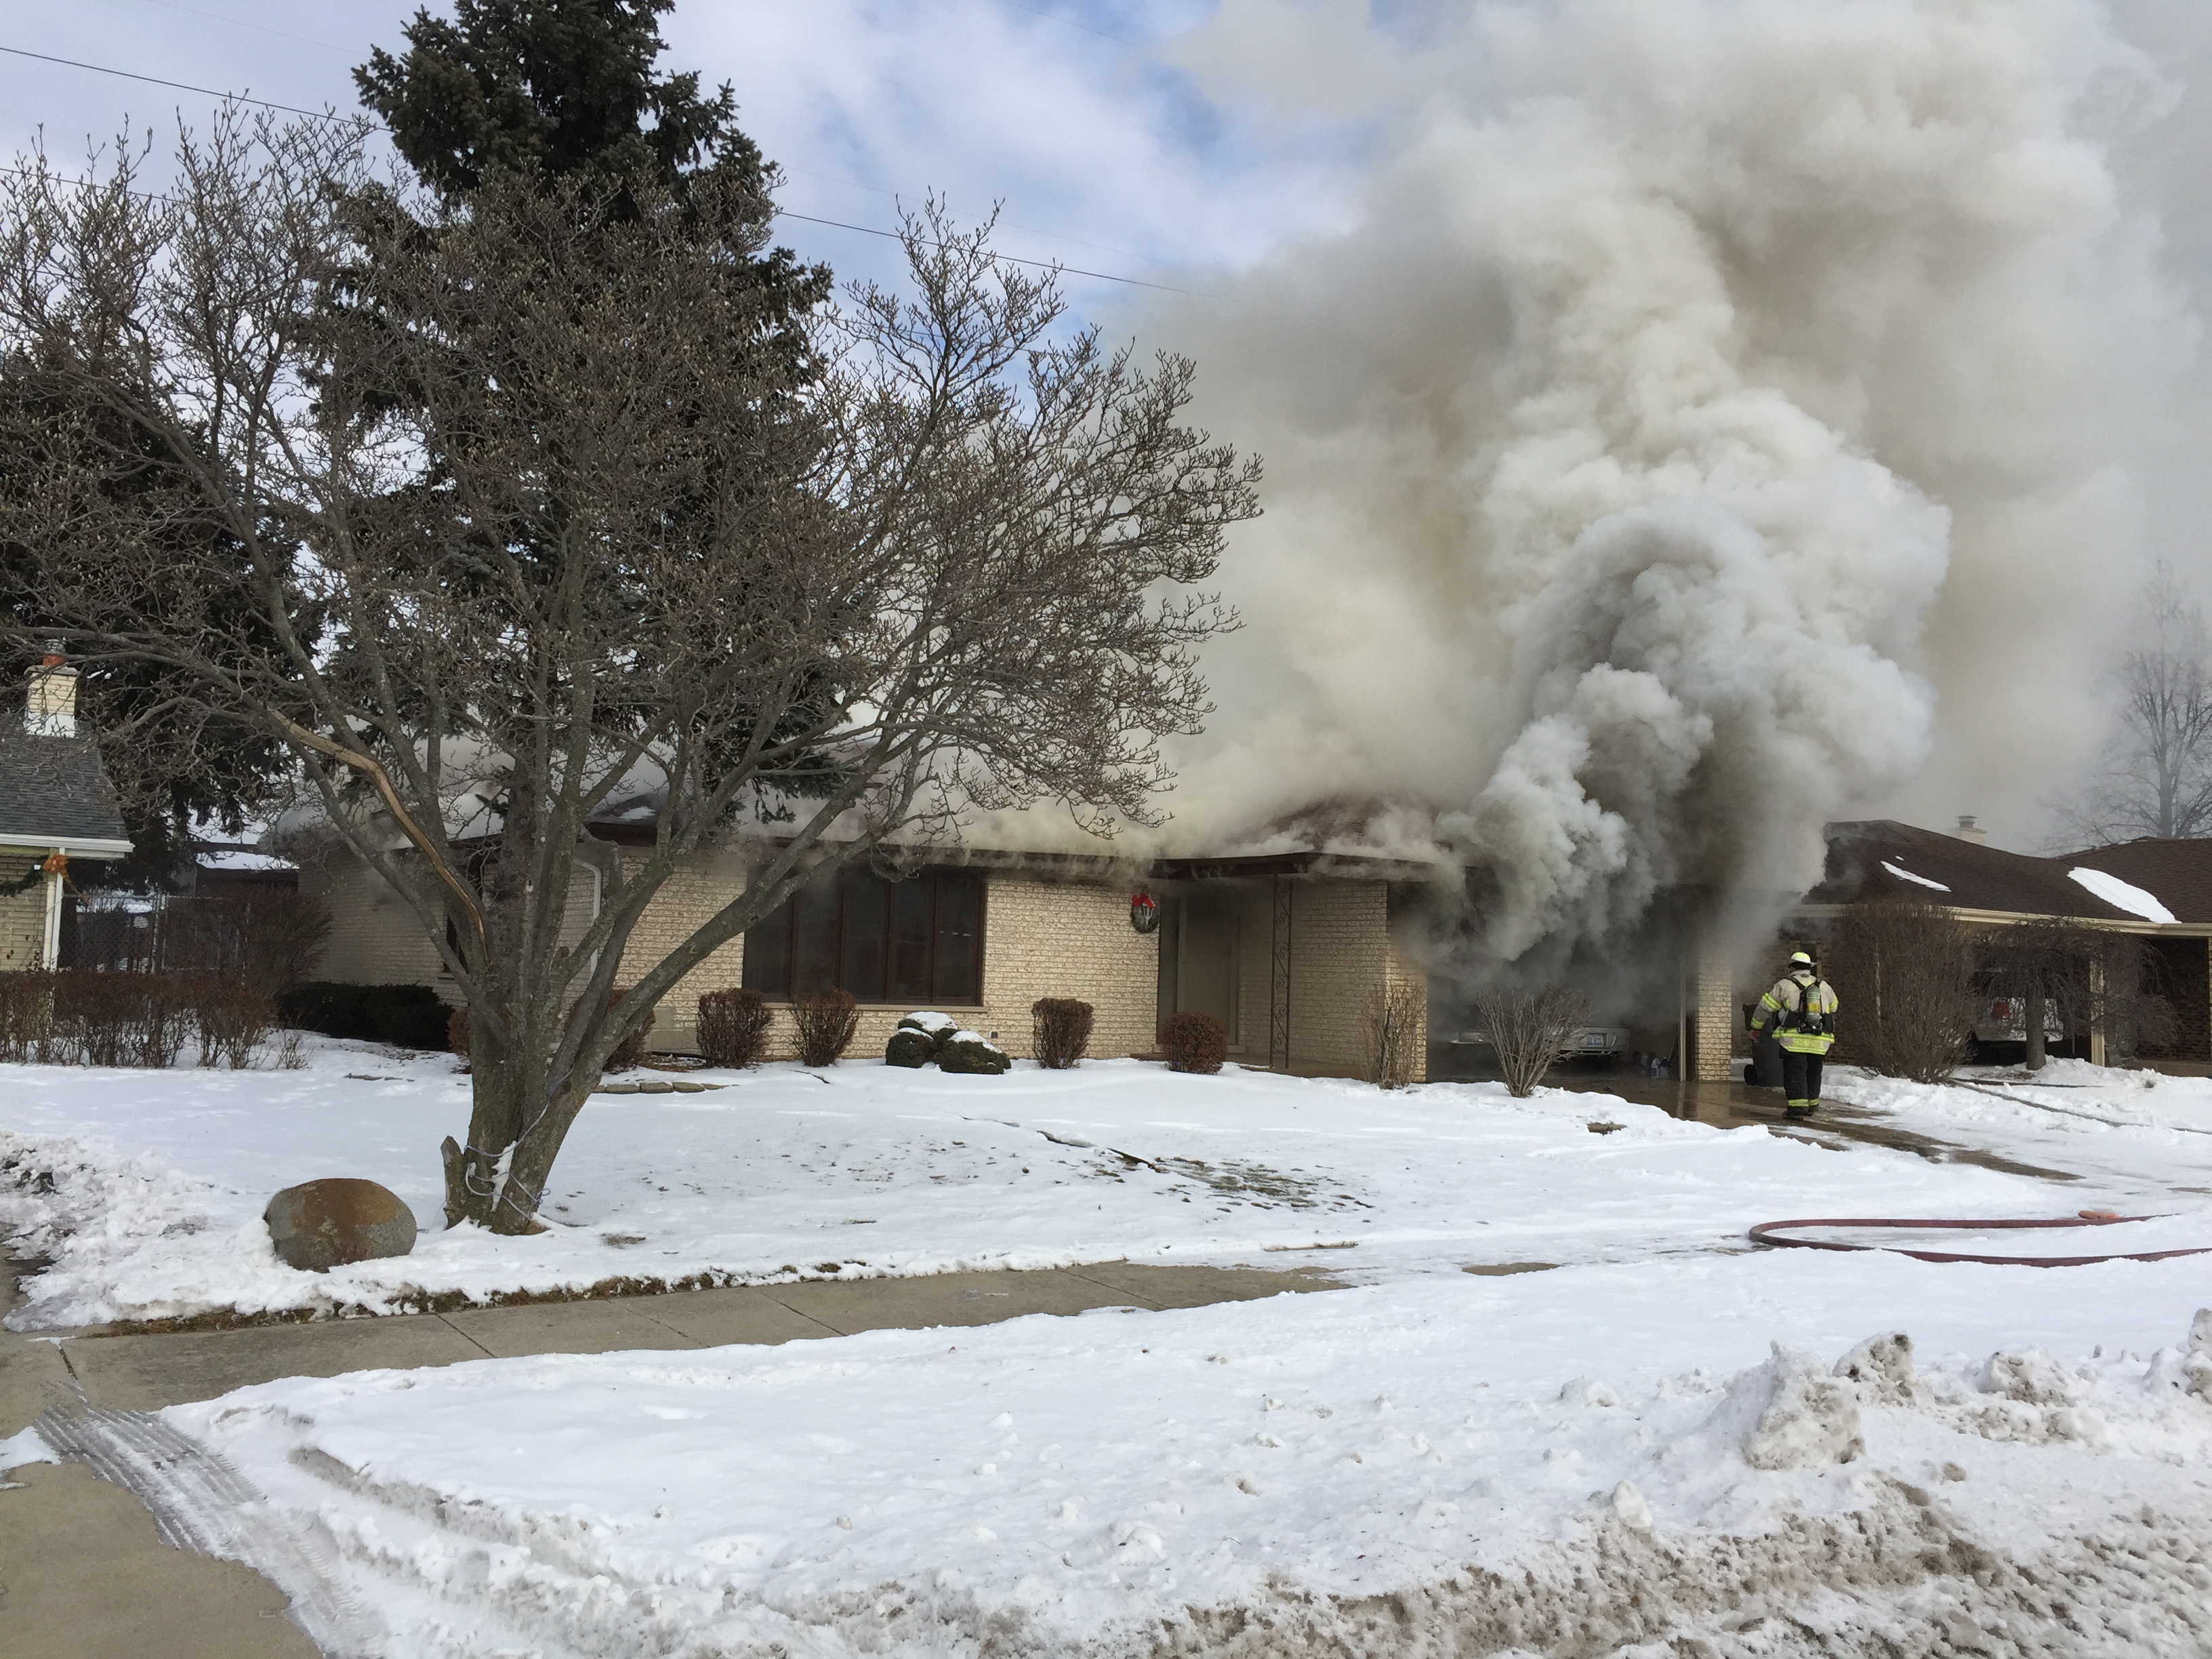 Orland Fire Protection District firefighters battle a home fire in Orland Park on Wednesday Jan. 14, 2015. Photo courtesy of the Orland Fire Protection District